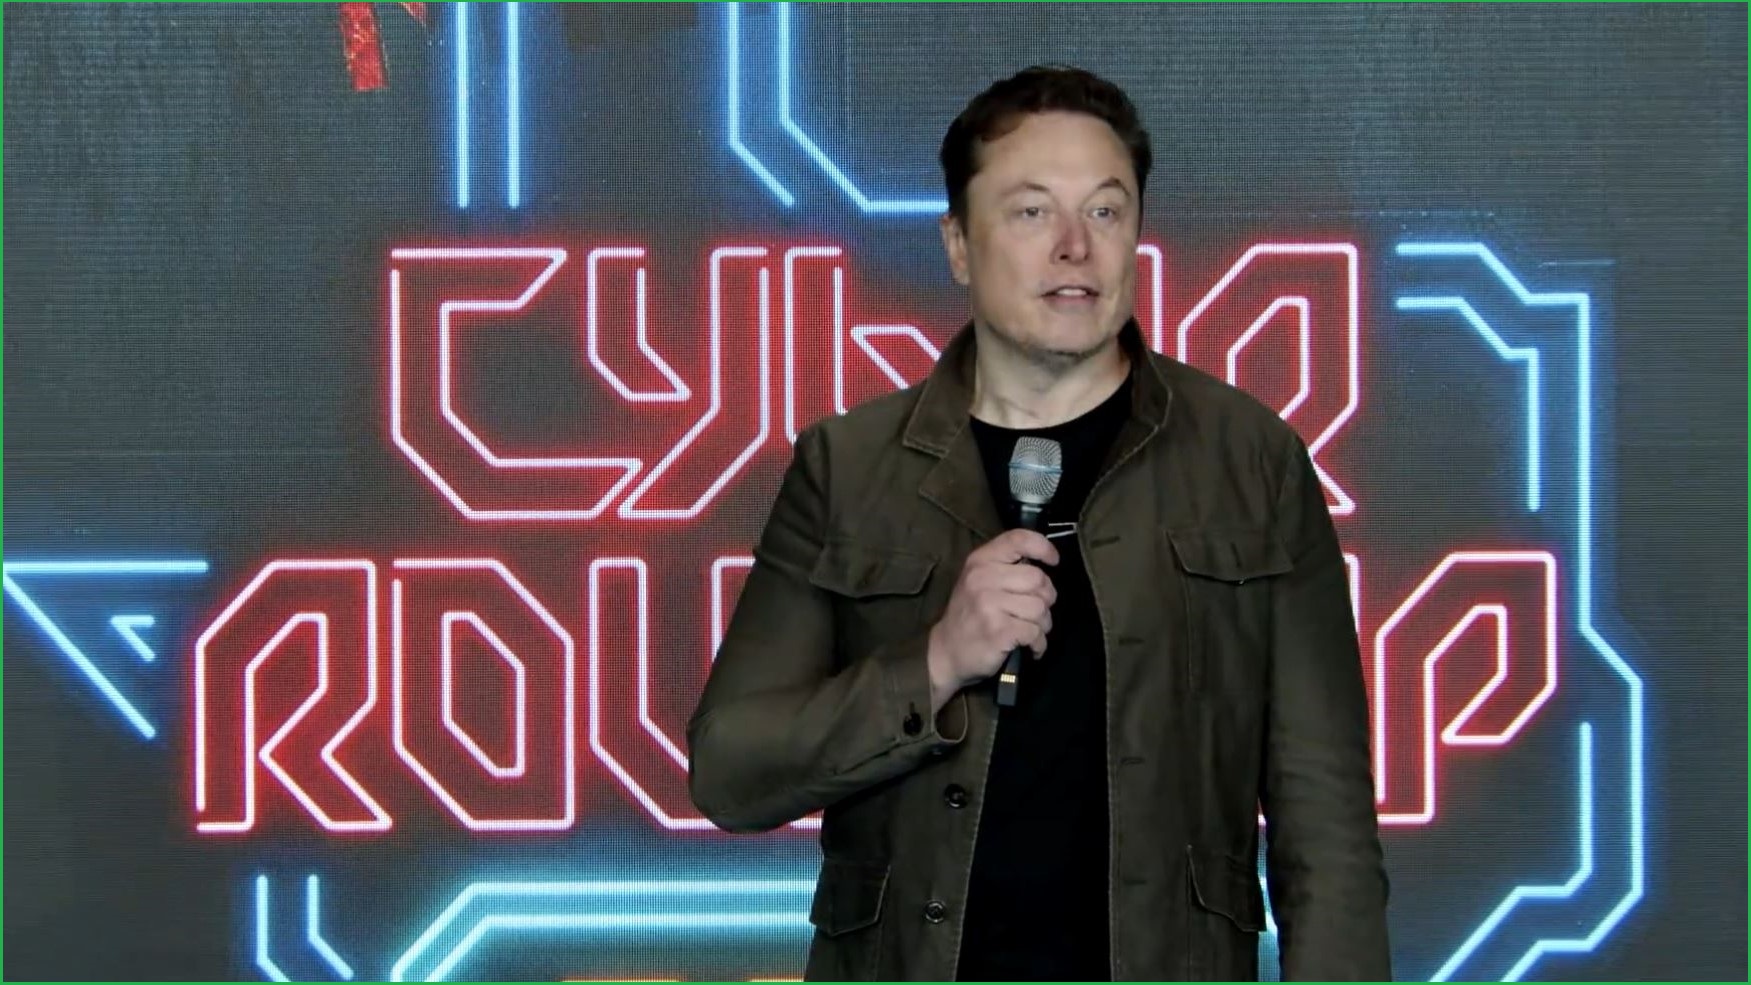 Elon Musk stands on a stage speaking into a microphone, in front of an electronic sign with the words 'Cyber roundup'.